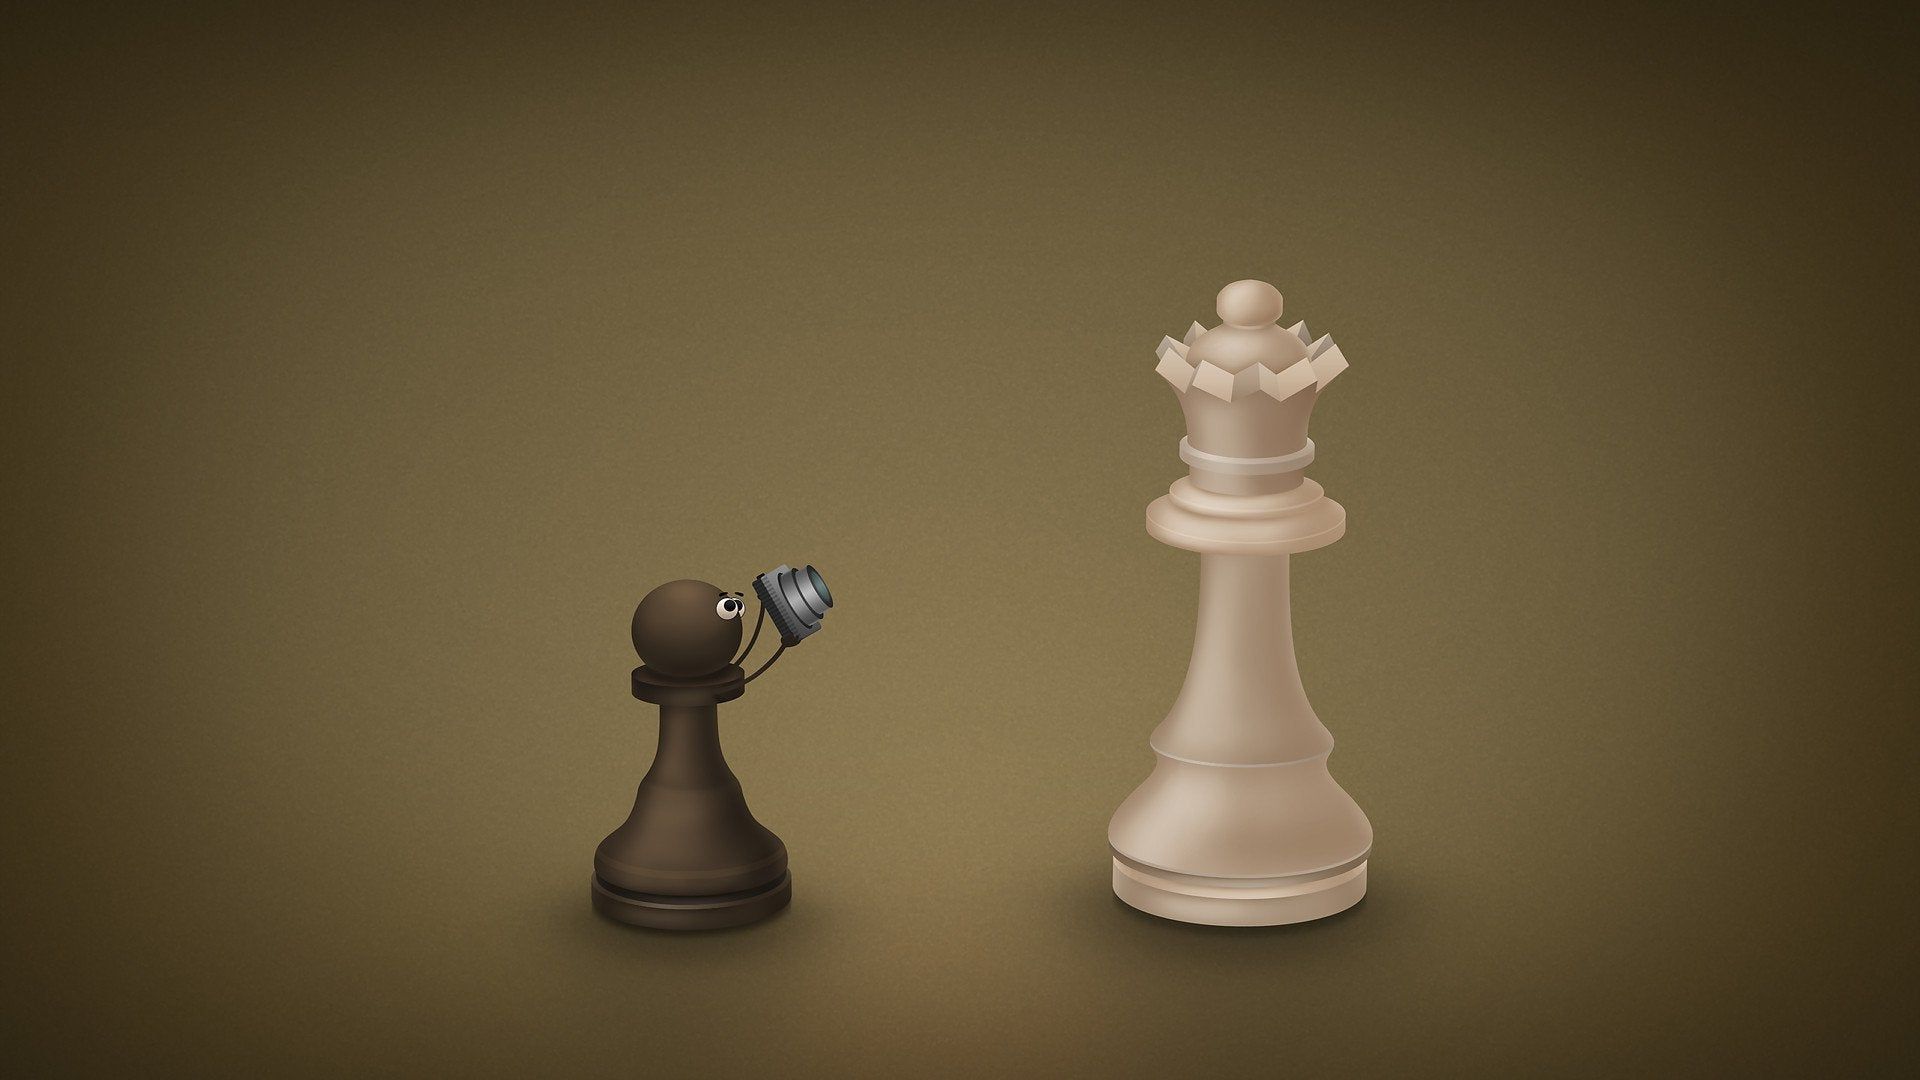 Something You Don't See Too Often: A Chess Wallpaper. Found On R Wallpaper. Enjoy!: Chess